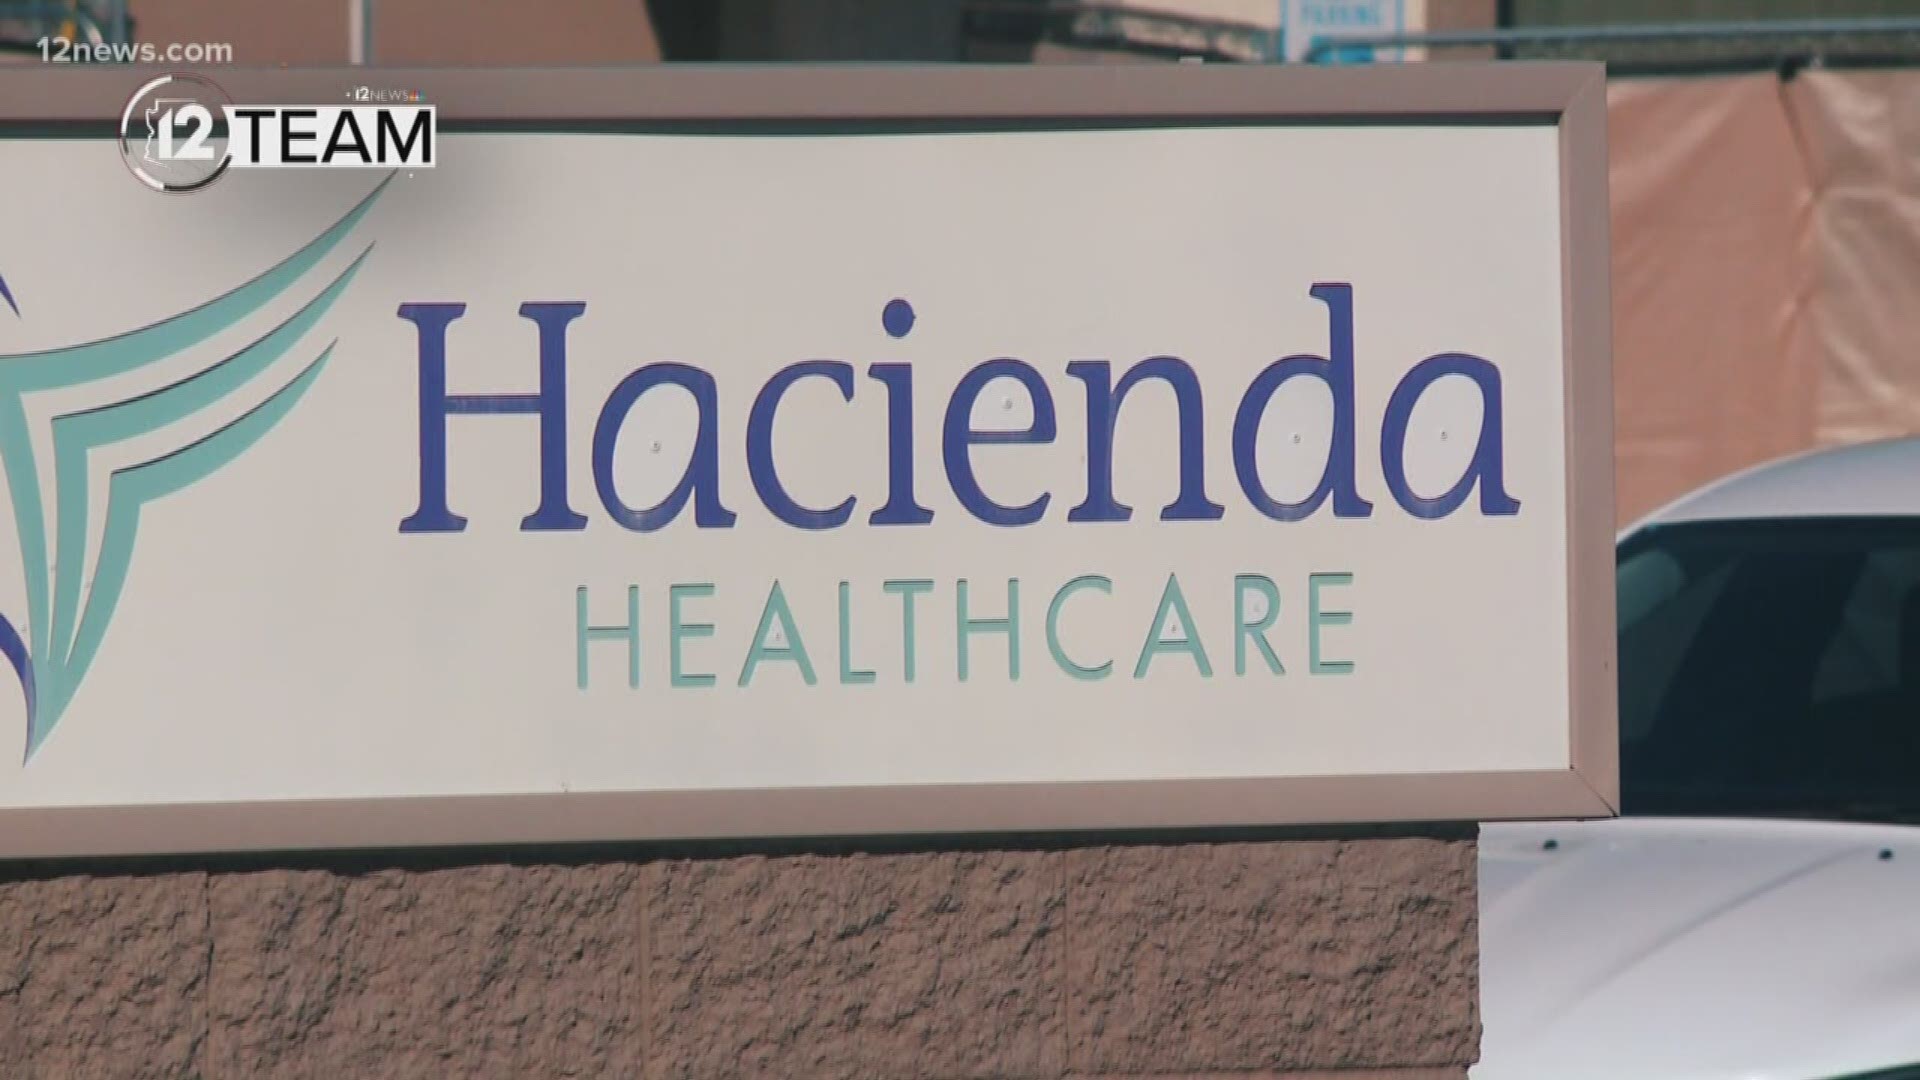 The family of an incapacitated woman notified the state of Arizona of their intent to sue after their daughter unexpectedly gave birth in December Wednesday. There's a lot of medical terminology in the claim, so 12 News asked a medical doctor, who has not examined the woman, to clarify some of what is in the documents.